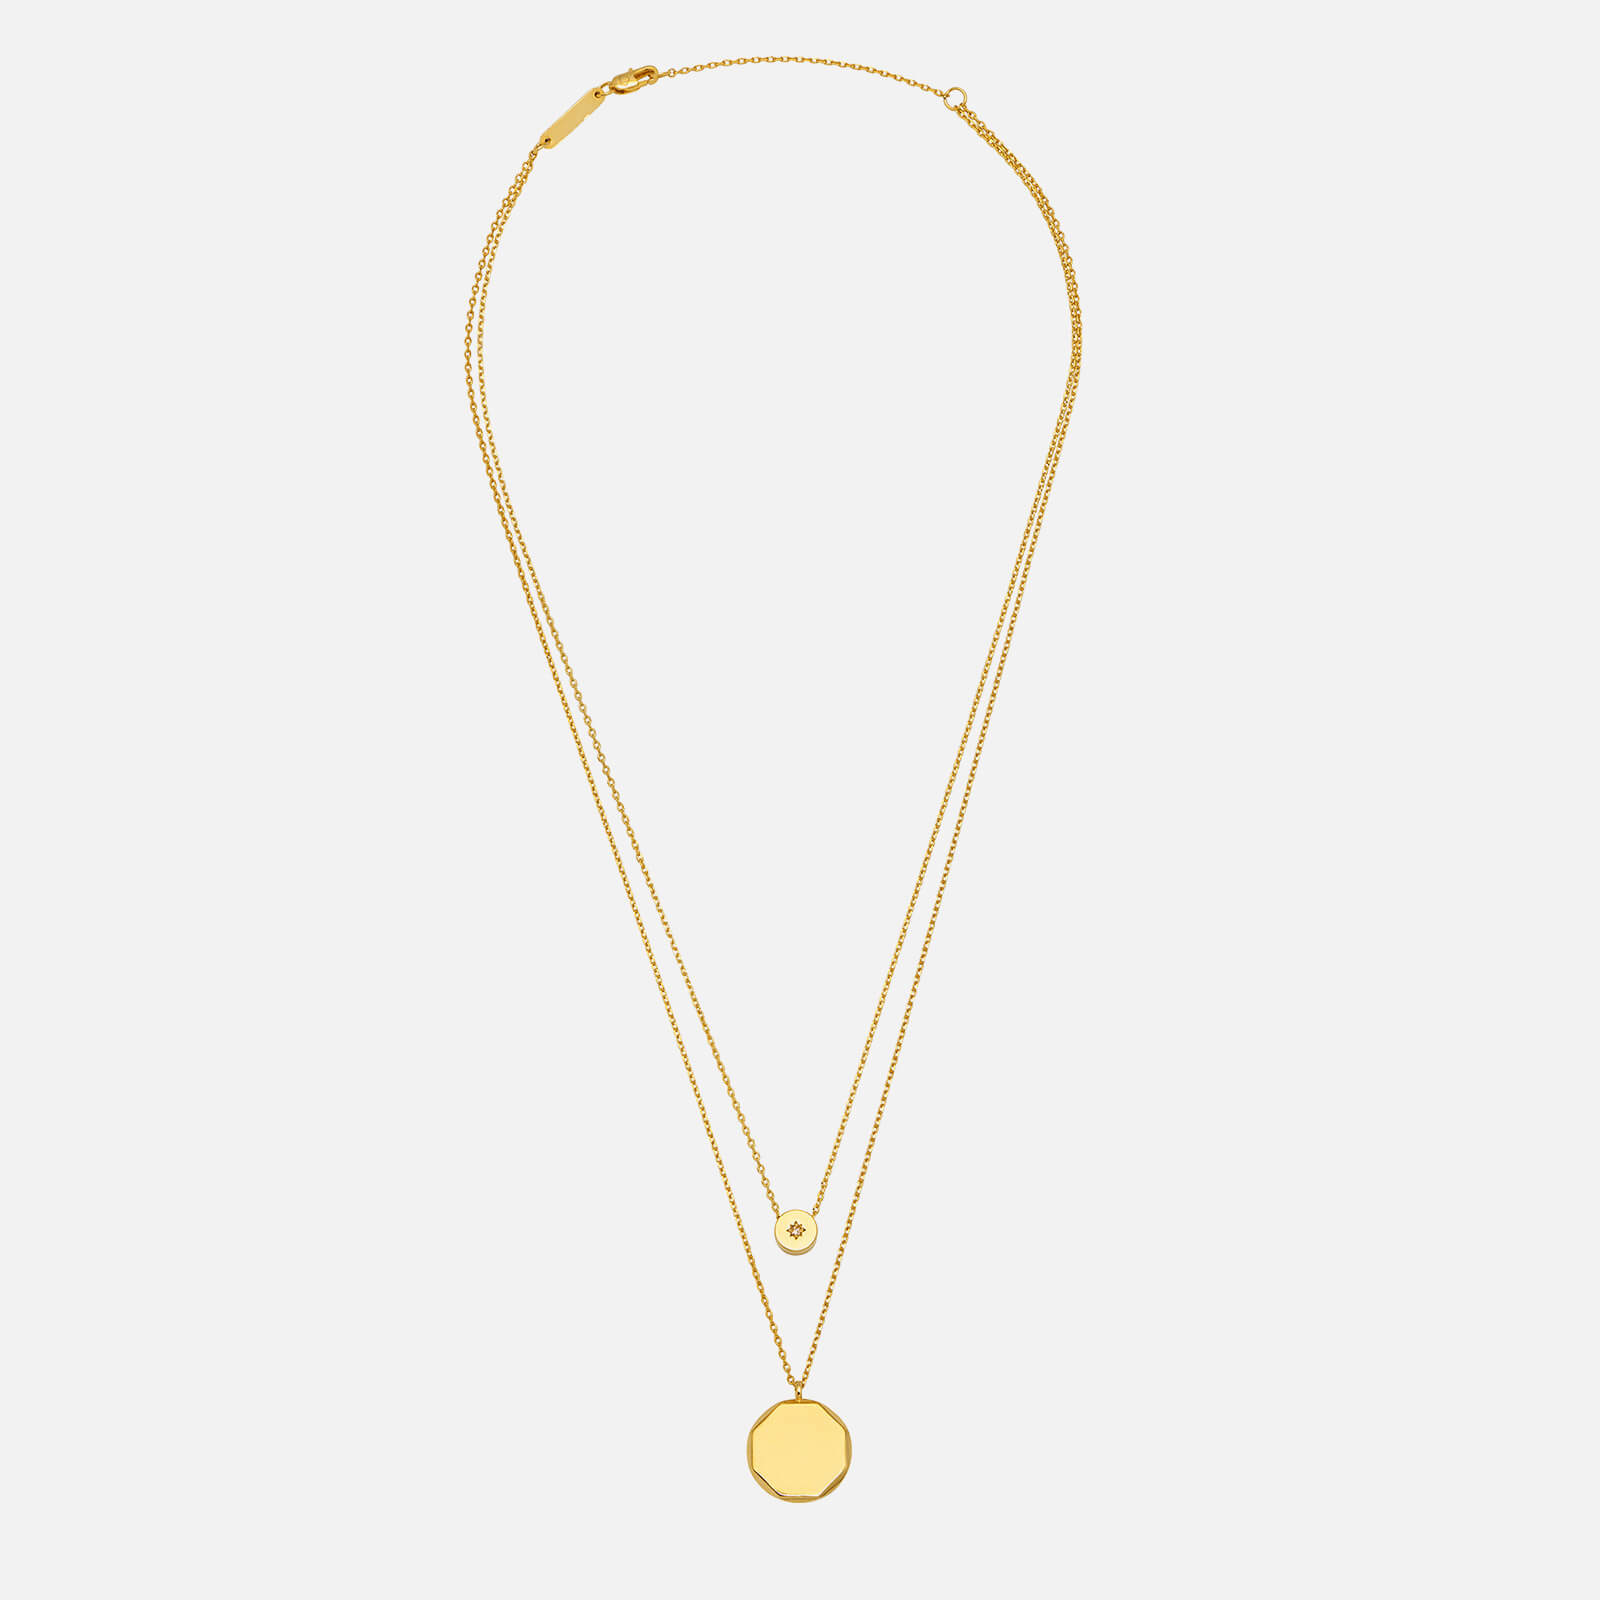 Estella Bartlett Women's Double Layer Necklace with Cz Slider - Gold Plate/Gold Plated